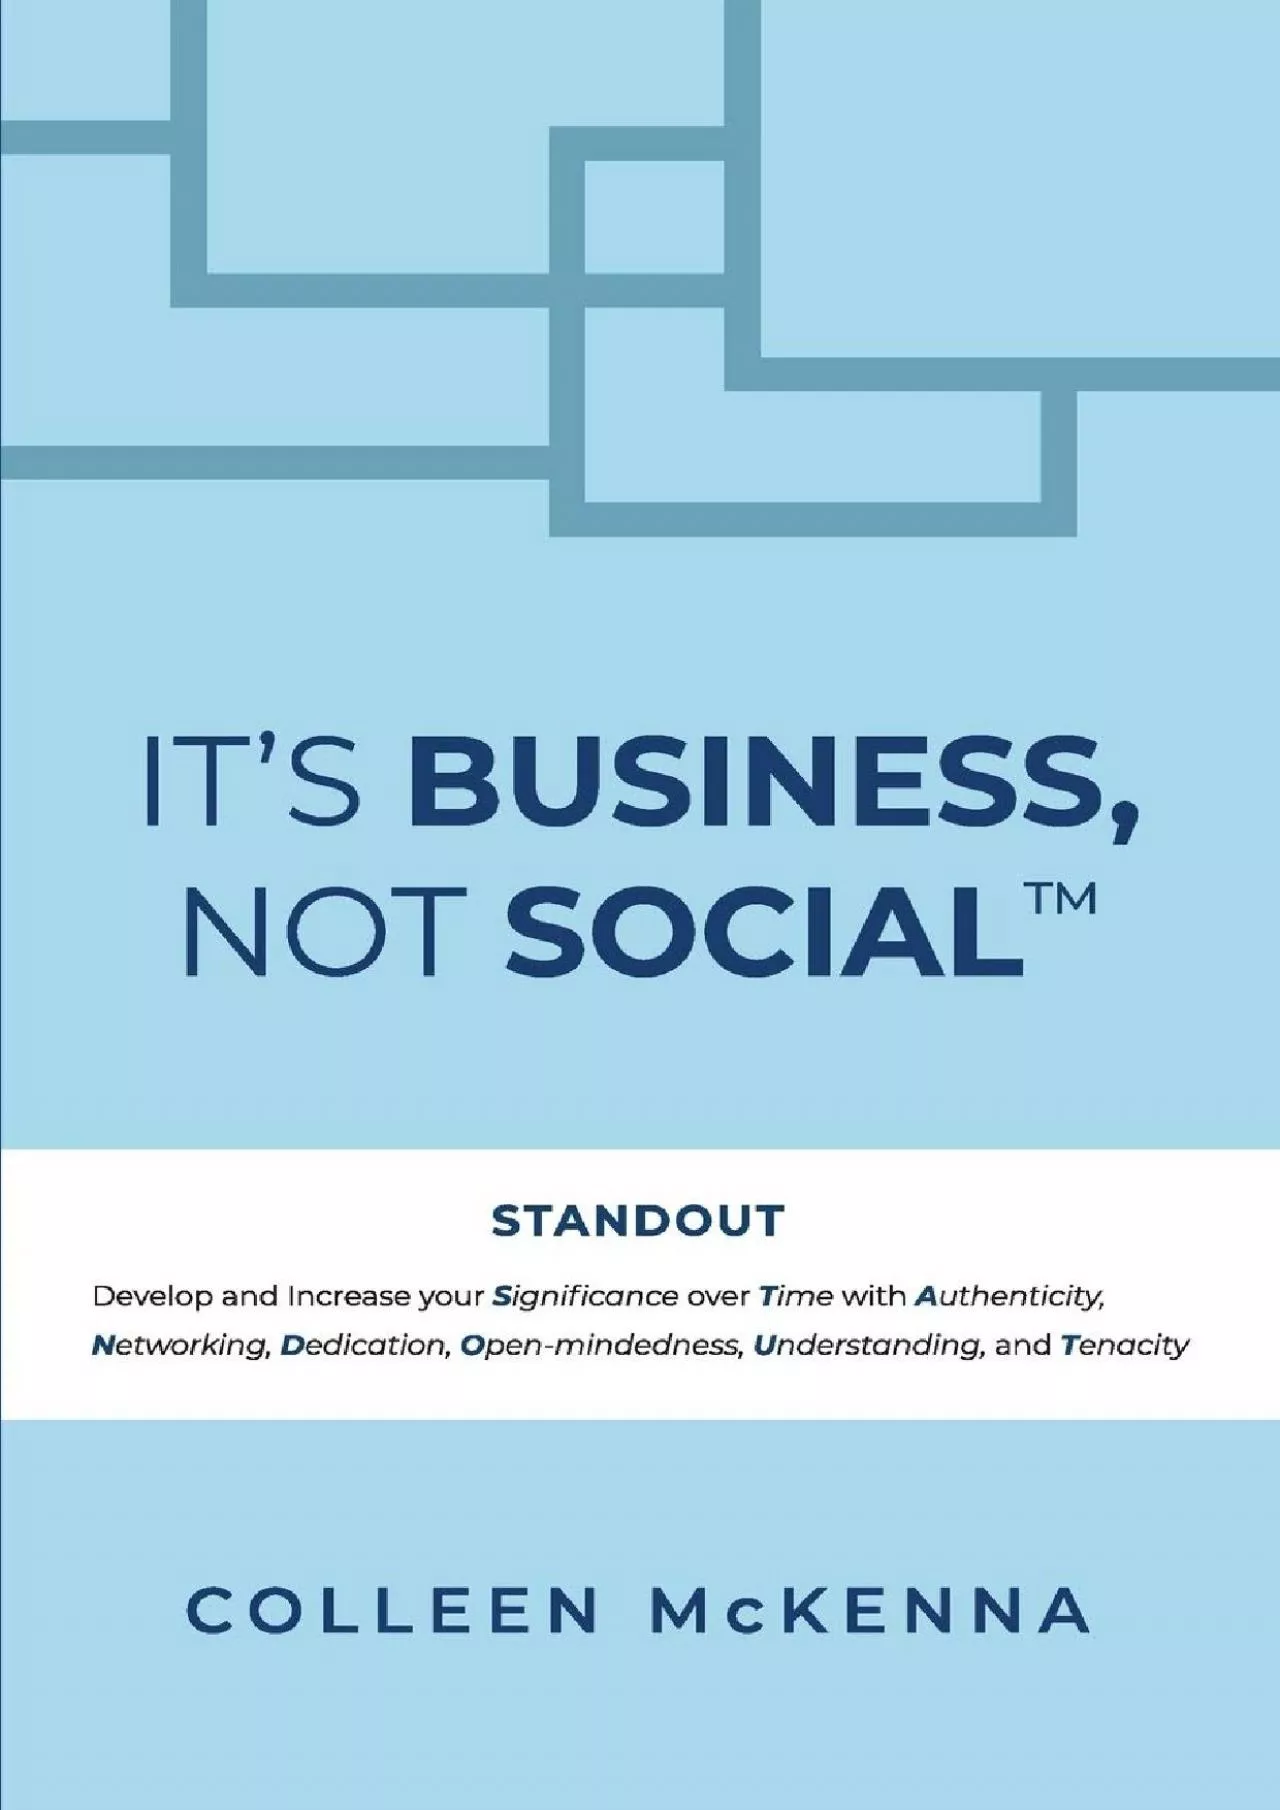 It\'s Business, Not Social(TM): STANDOUT. Develop and increase your Significance over